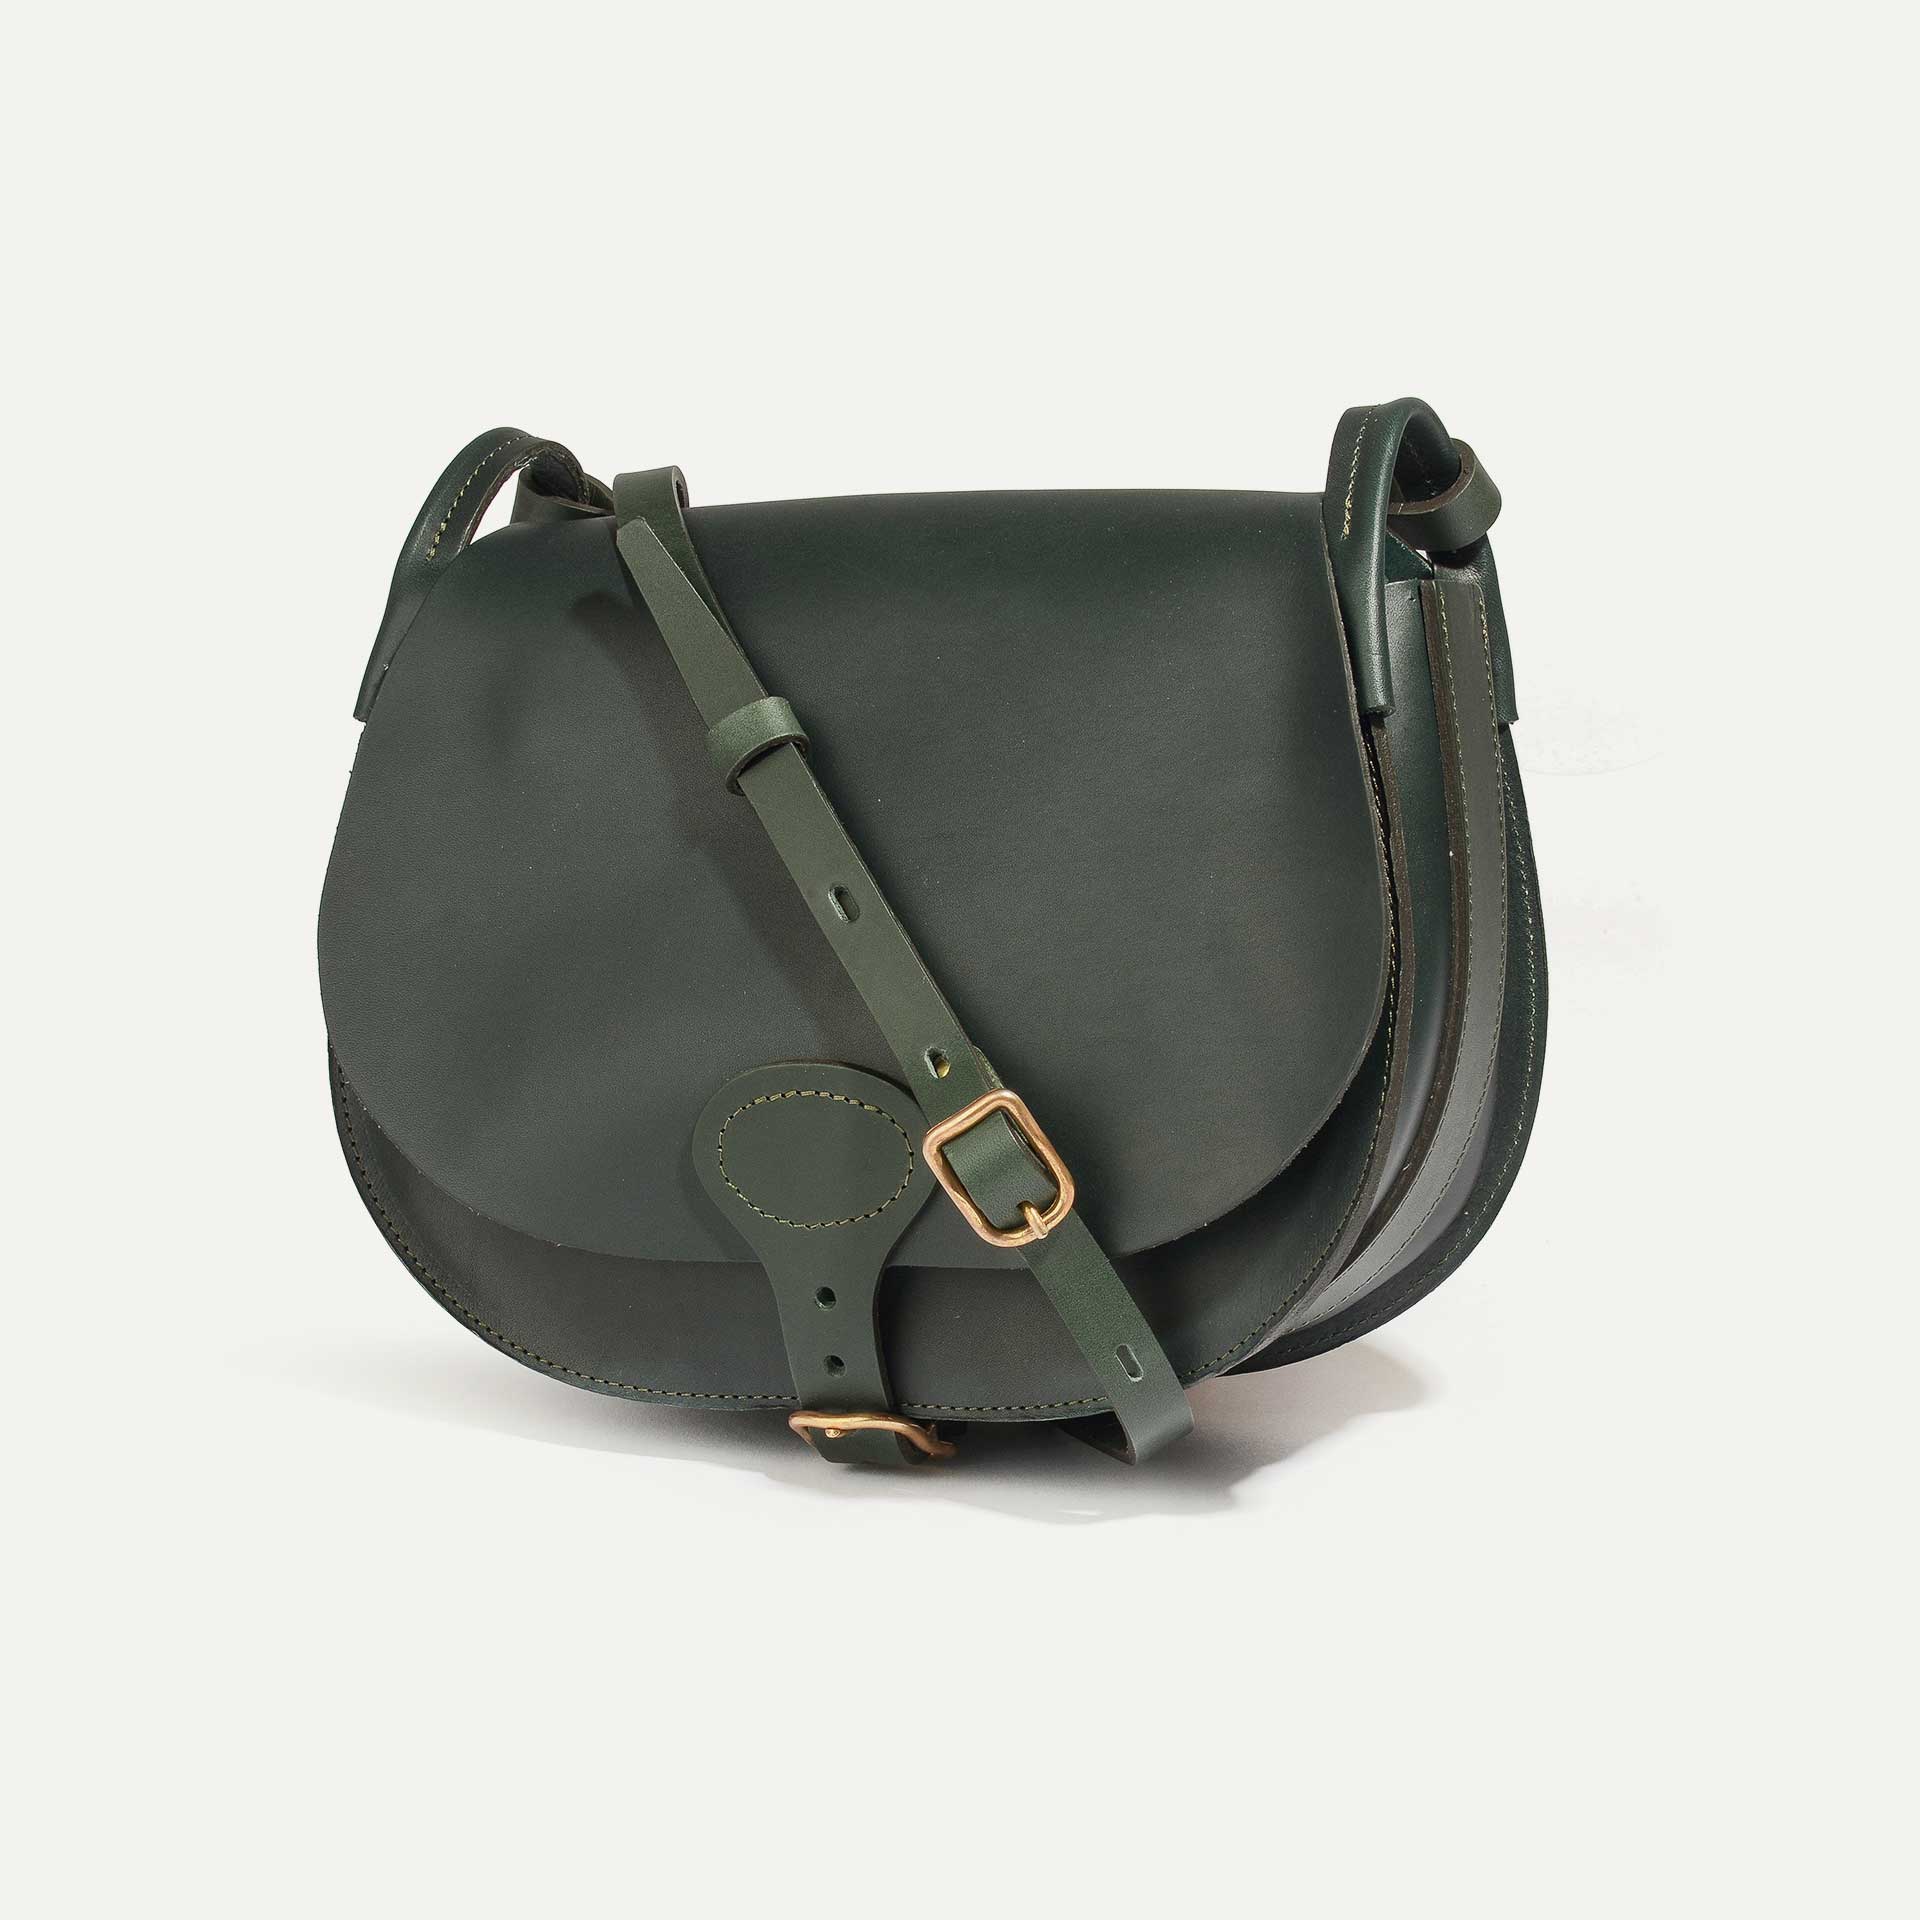 Diane L bag in green leather